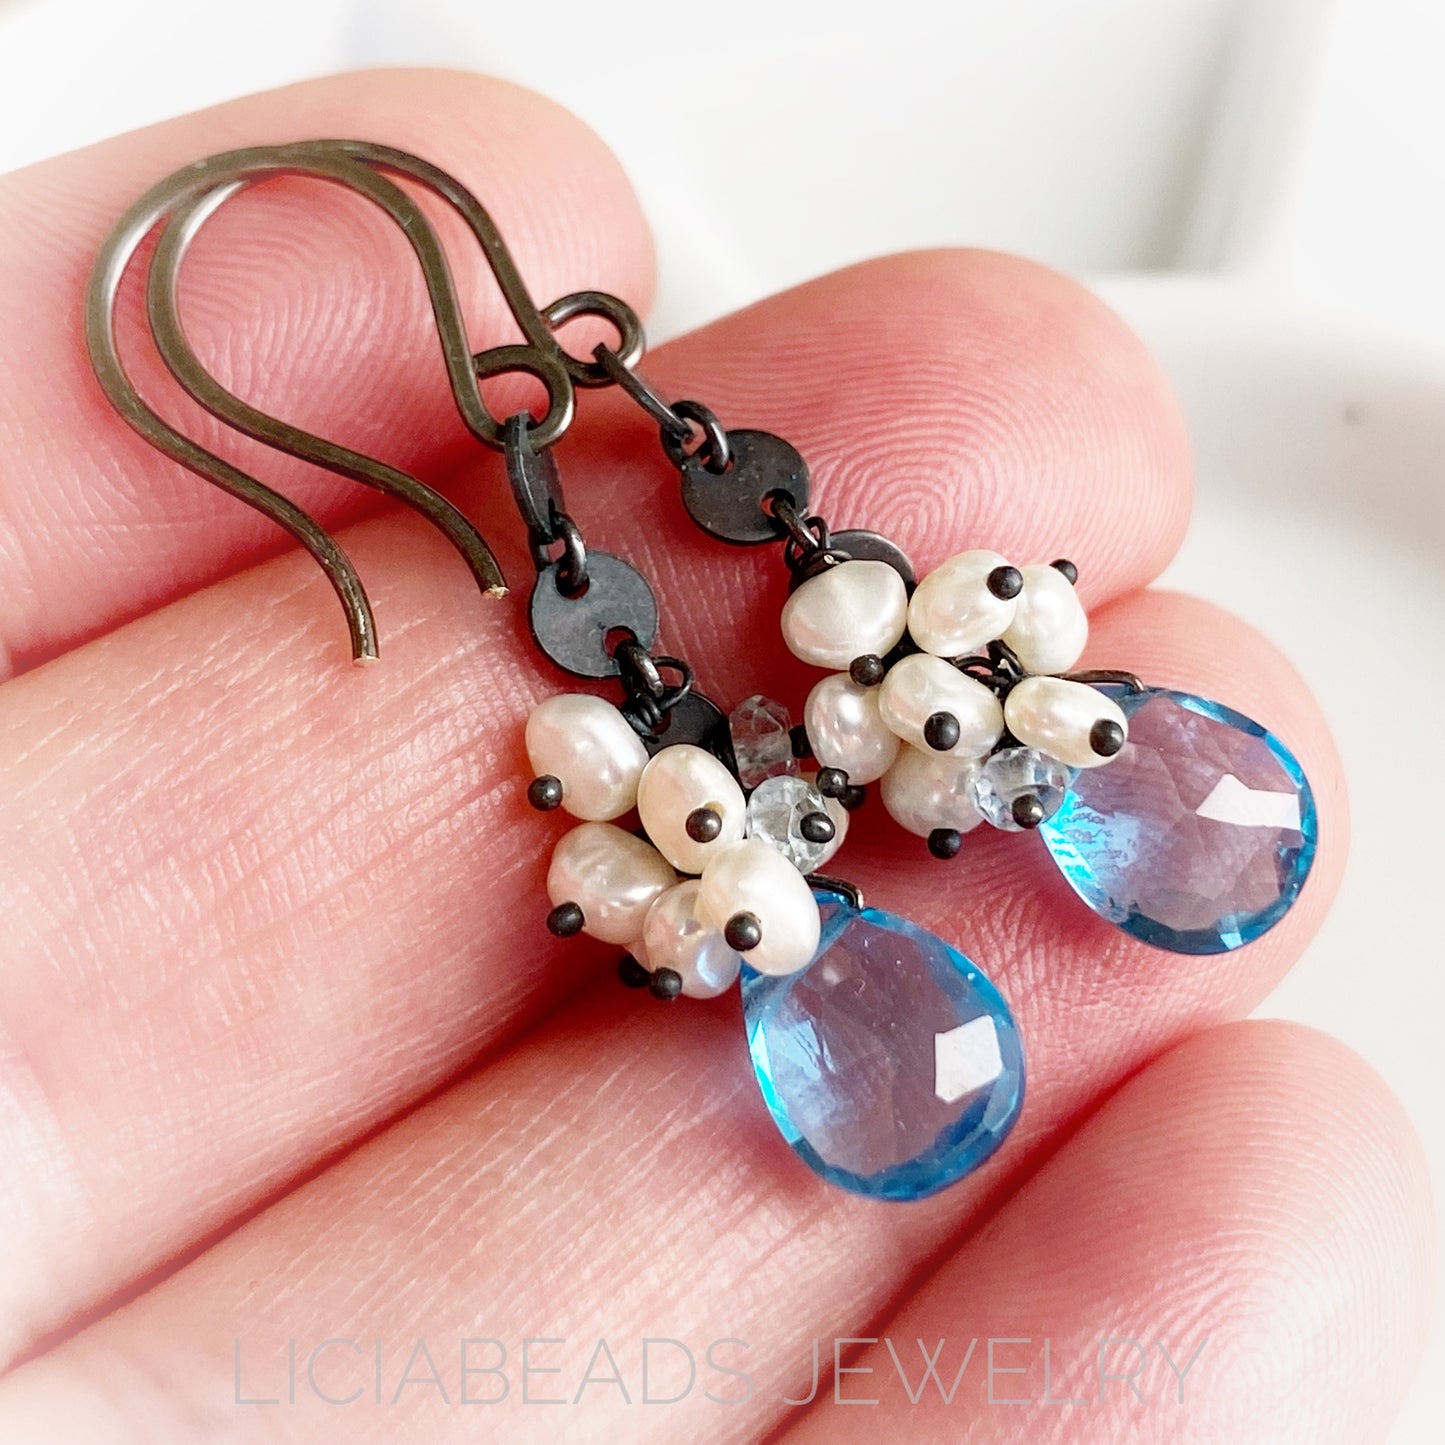 Swiss Blue topaz and pearls on blackened sterling silver